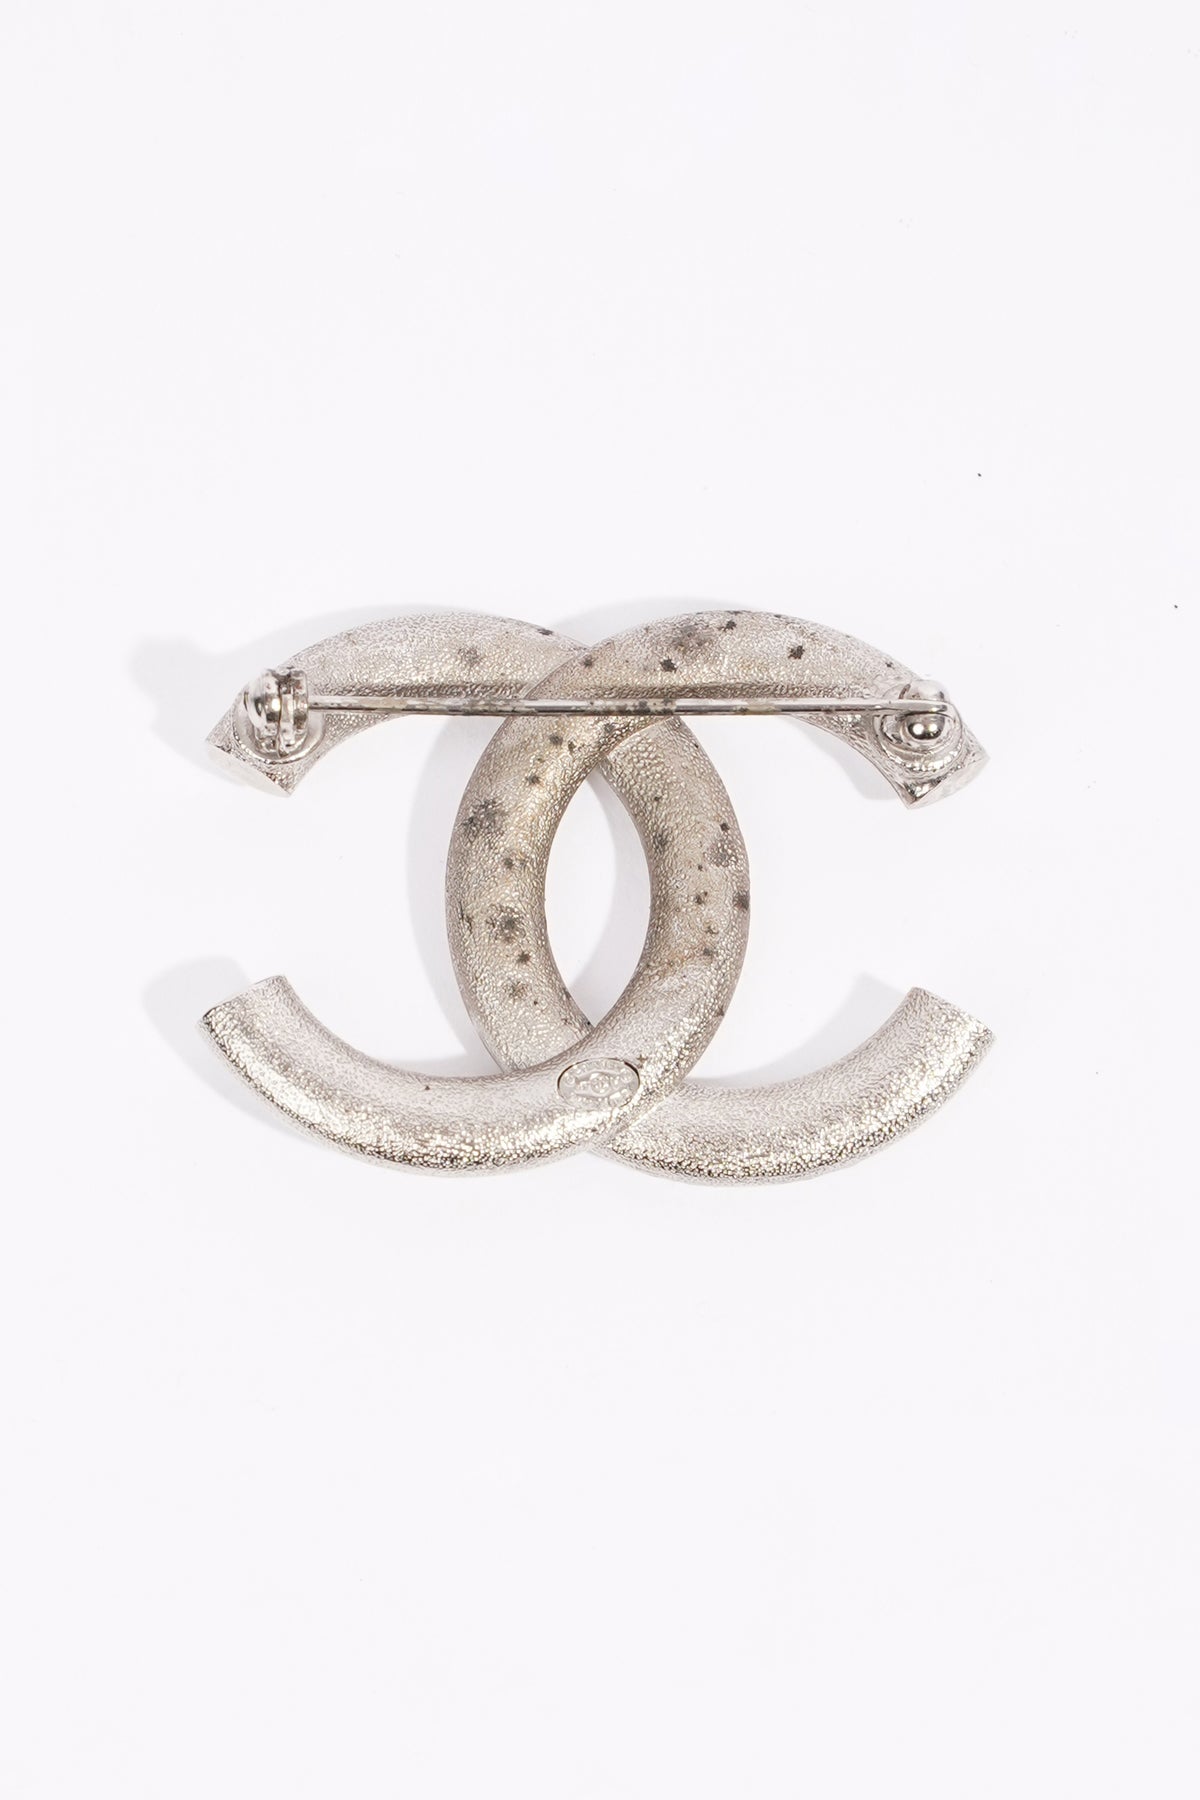 Pin & brooche Chanel Silver in Metal - 37329851